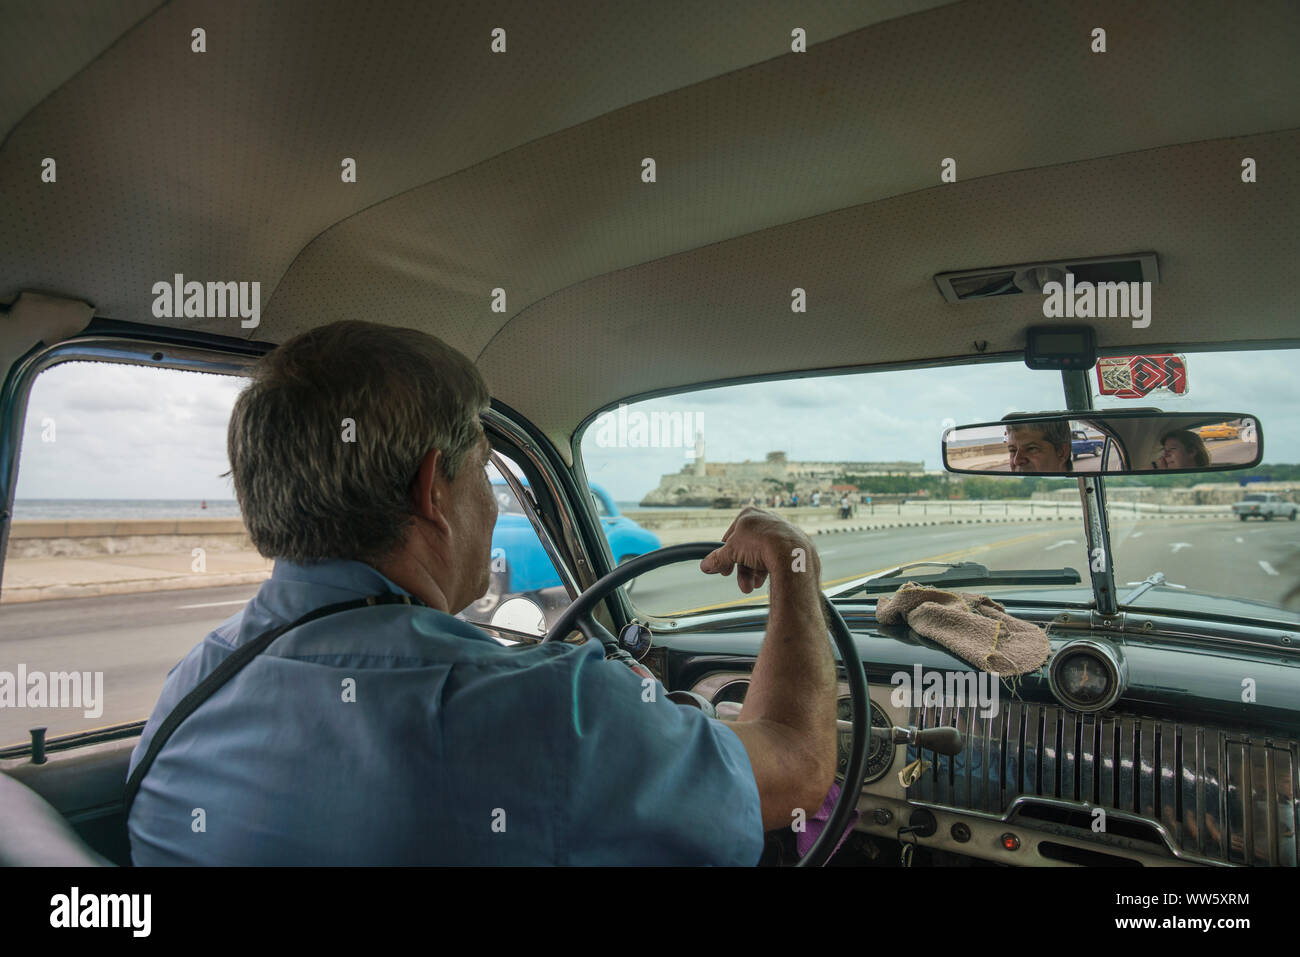 Vintage car taxi from the inside with driver and view at El Morro, Cuba Stock Photo